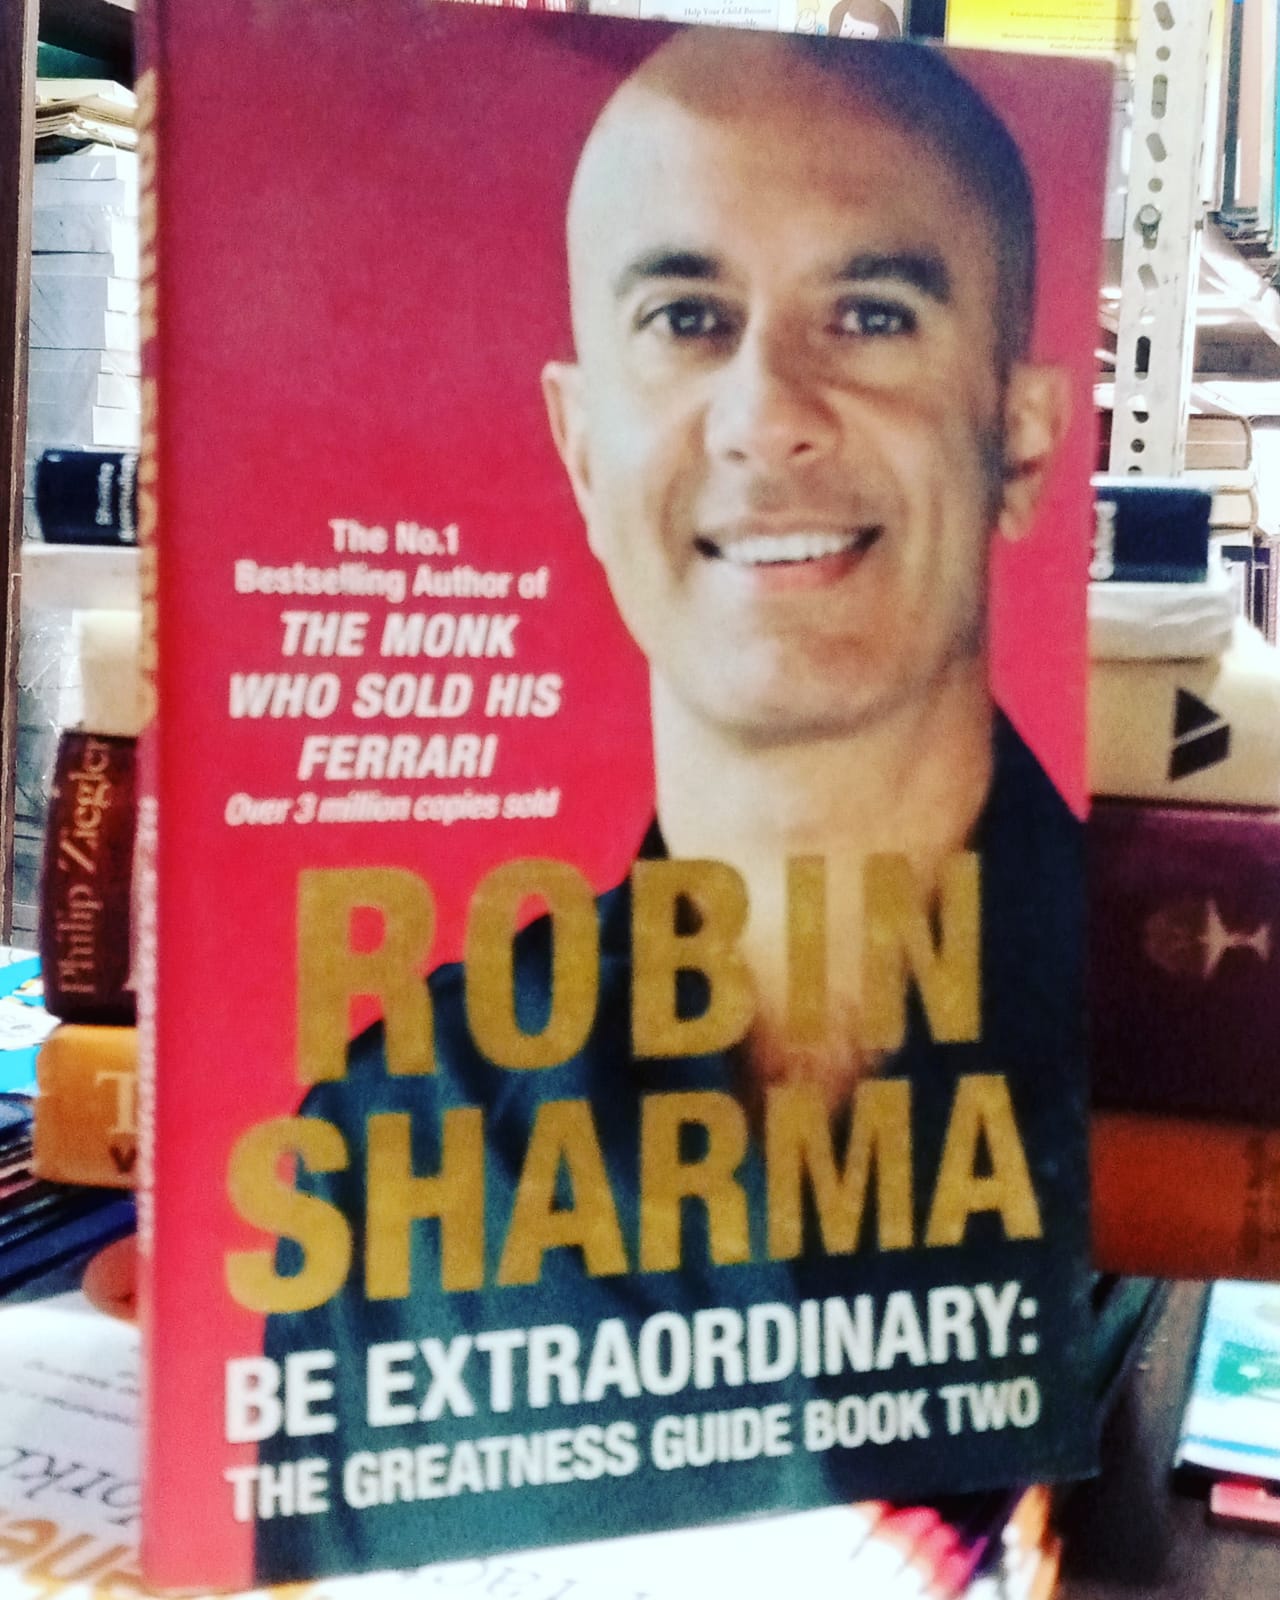 be extraordinary: the greatness guide book 2 by robin sharma. original paperback large size